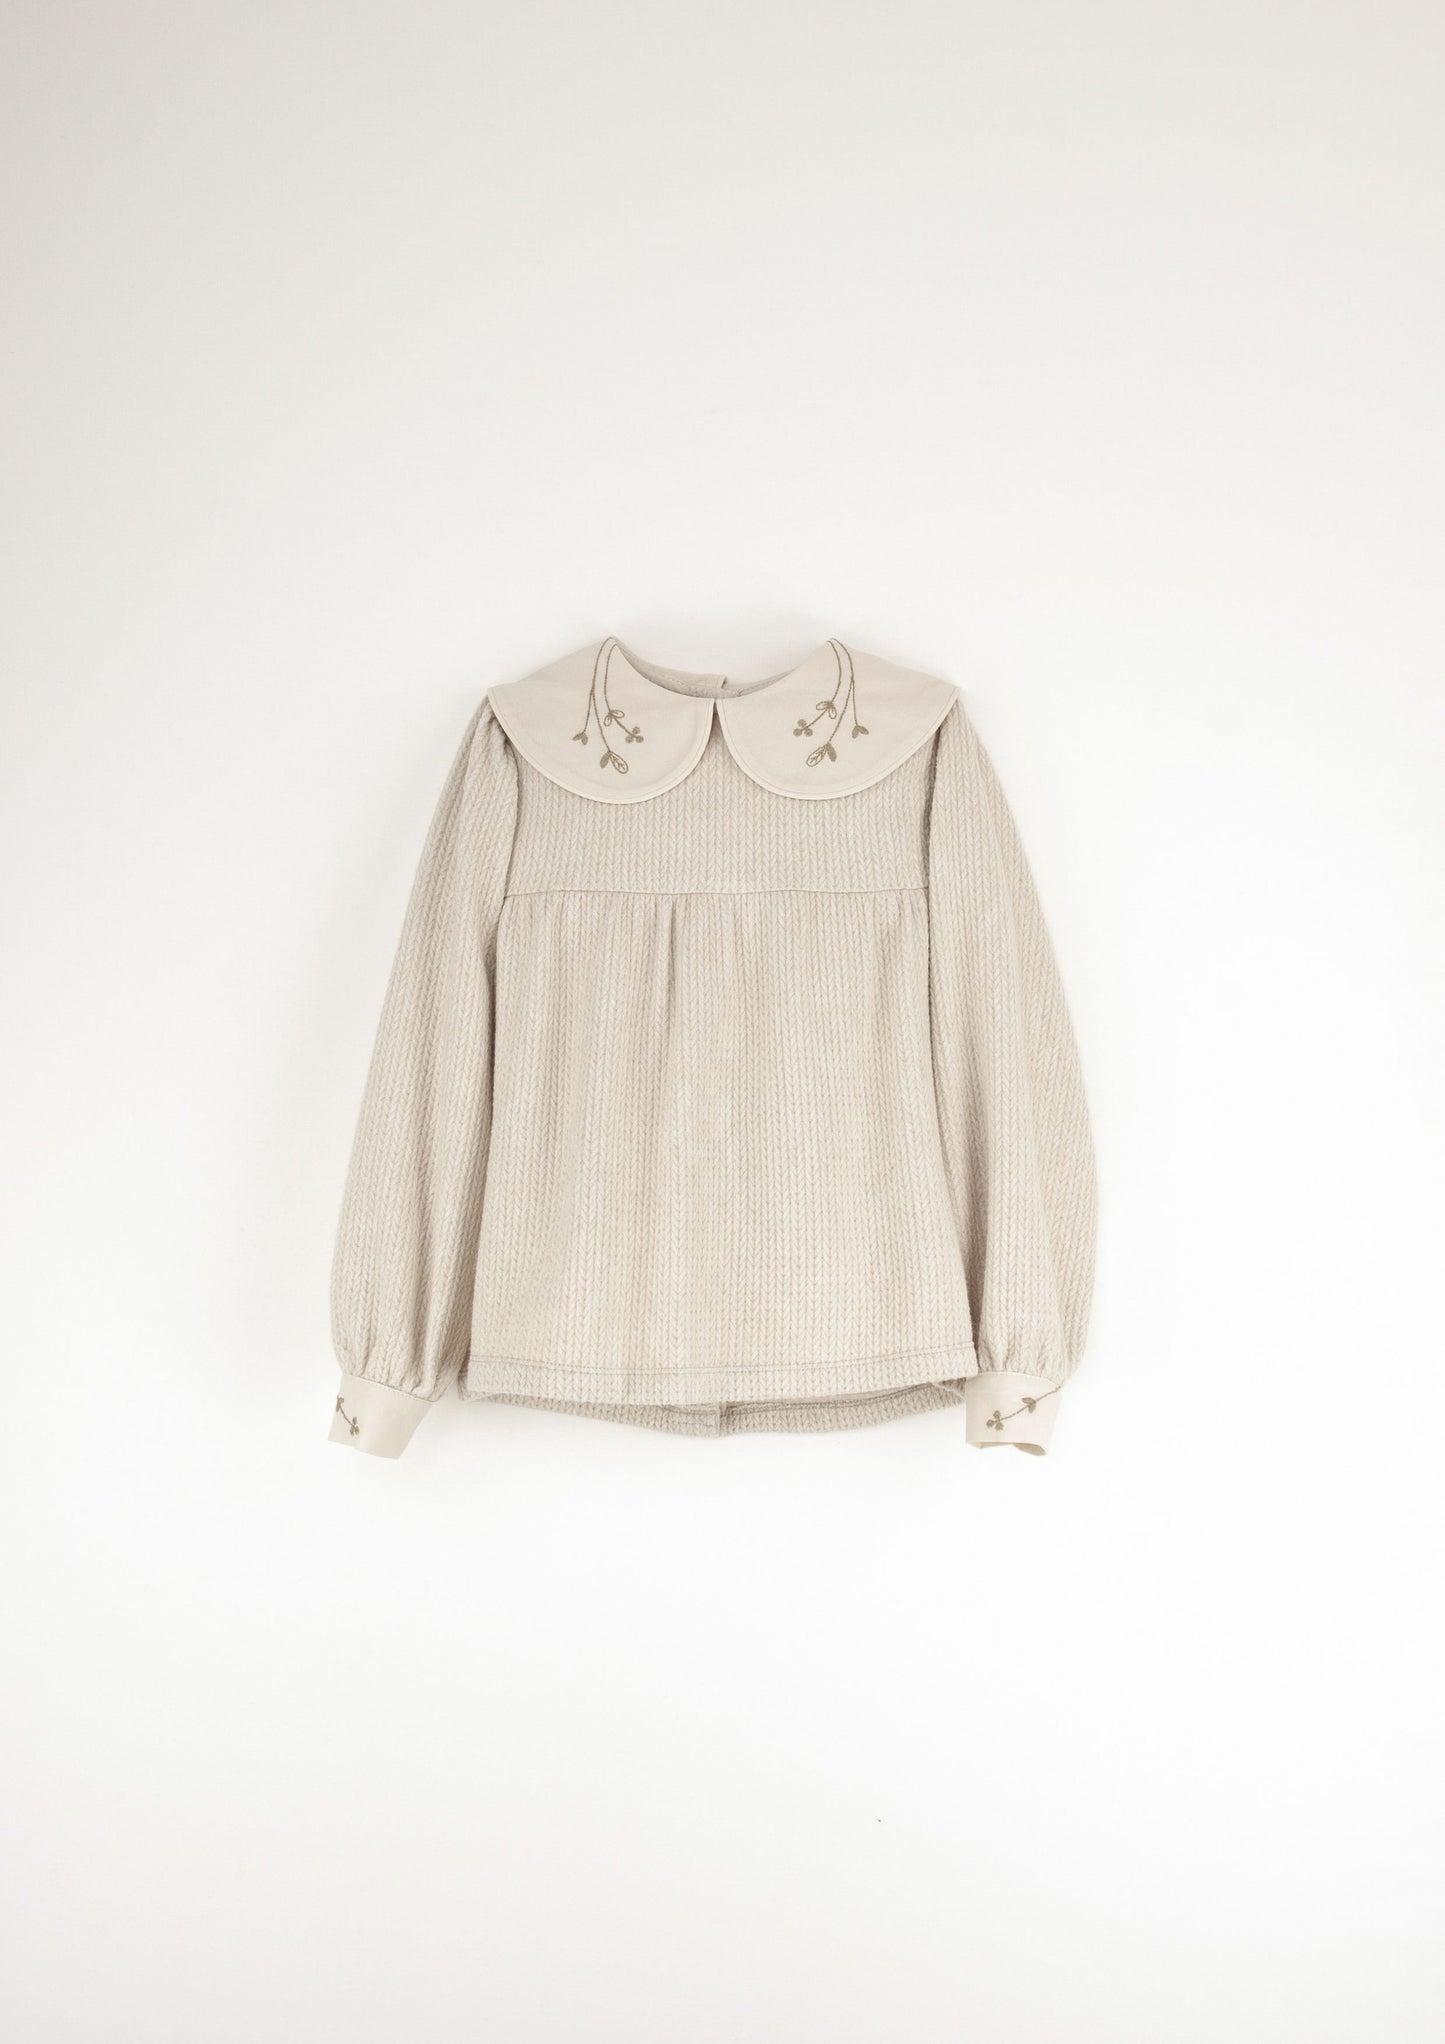 【LAST TWO】Knitted blouse with baby collar